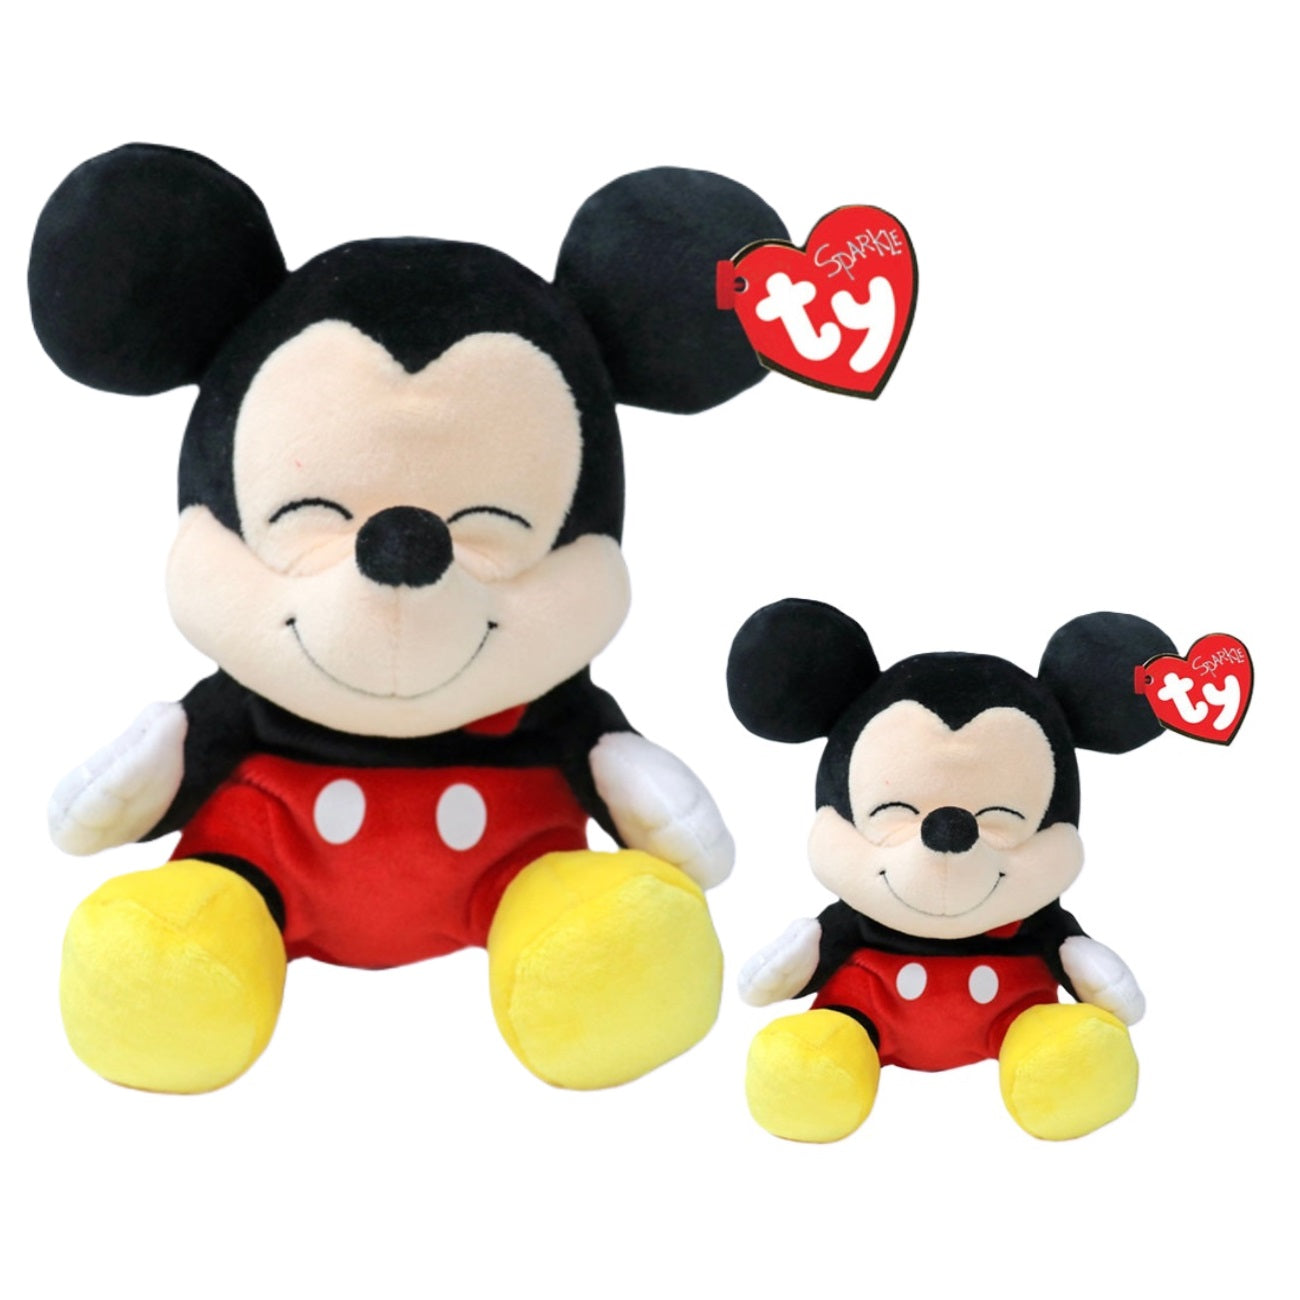 Beanie Disney Softbody Collection - Mickey Mouse